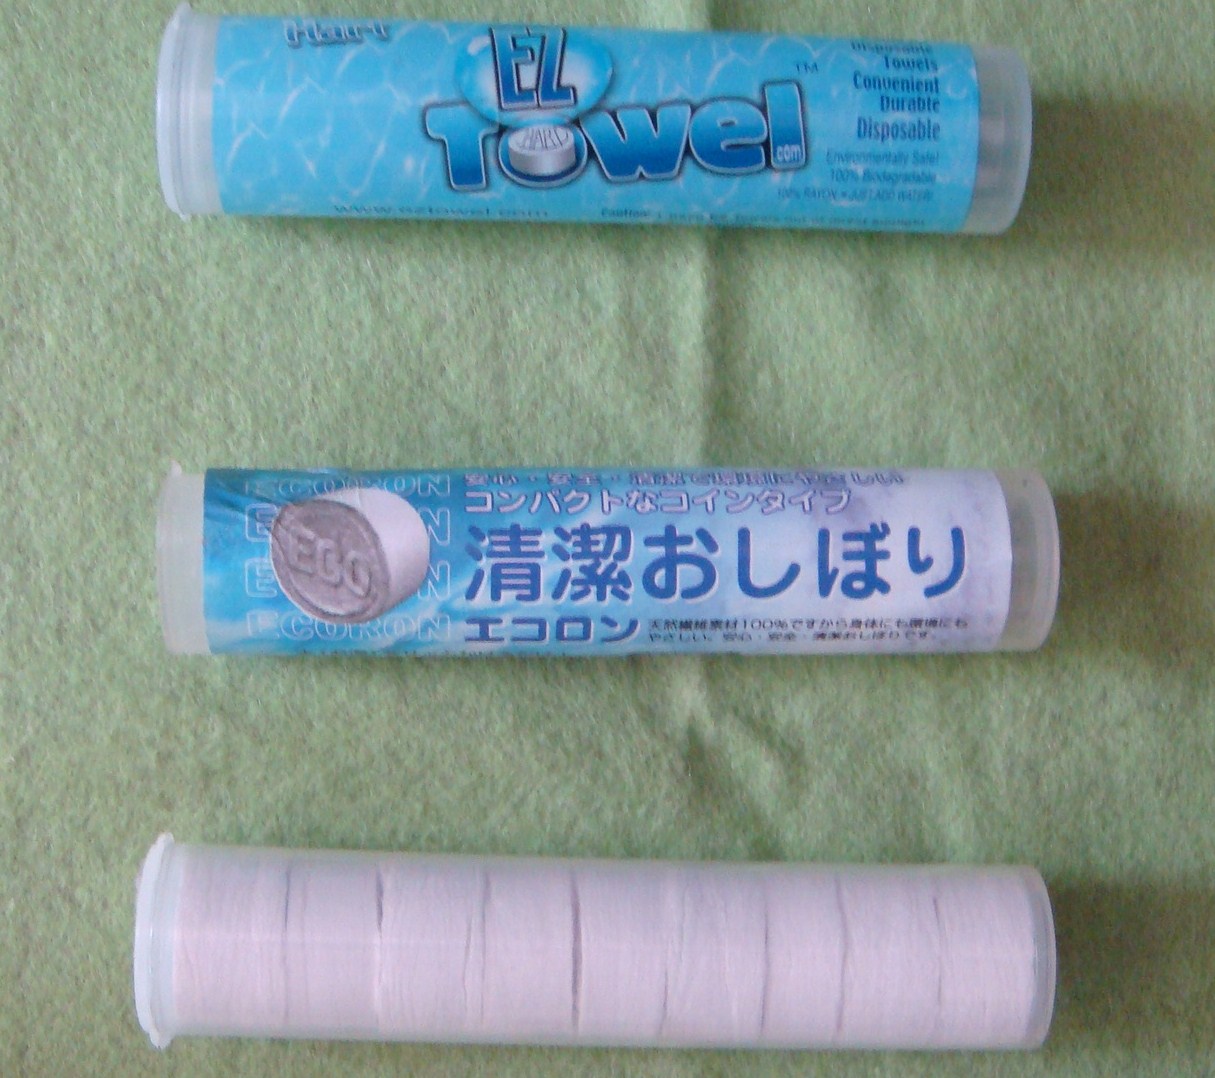 8PCS Tube Packing with Customer's Logo Printing as YT-721.